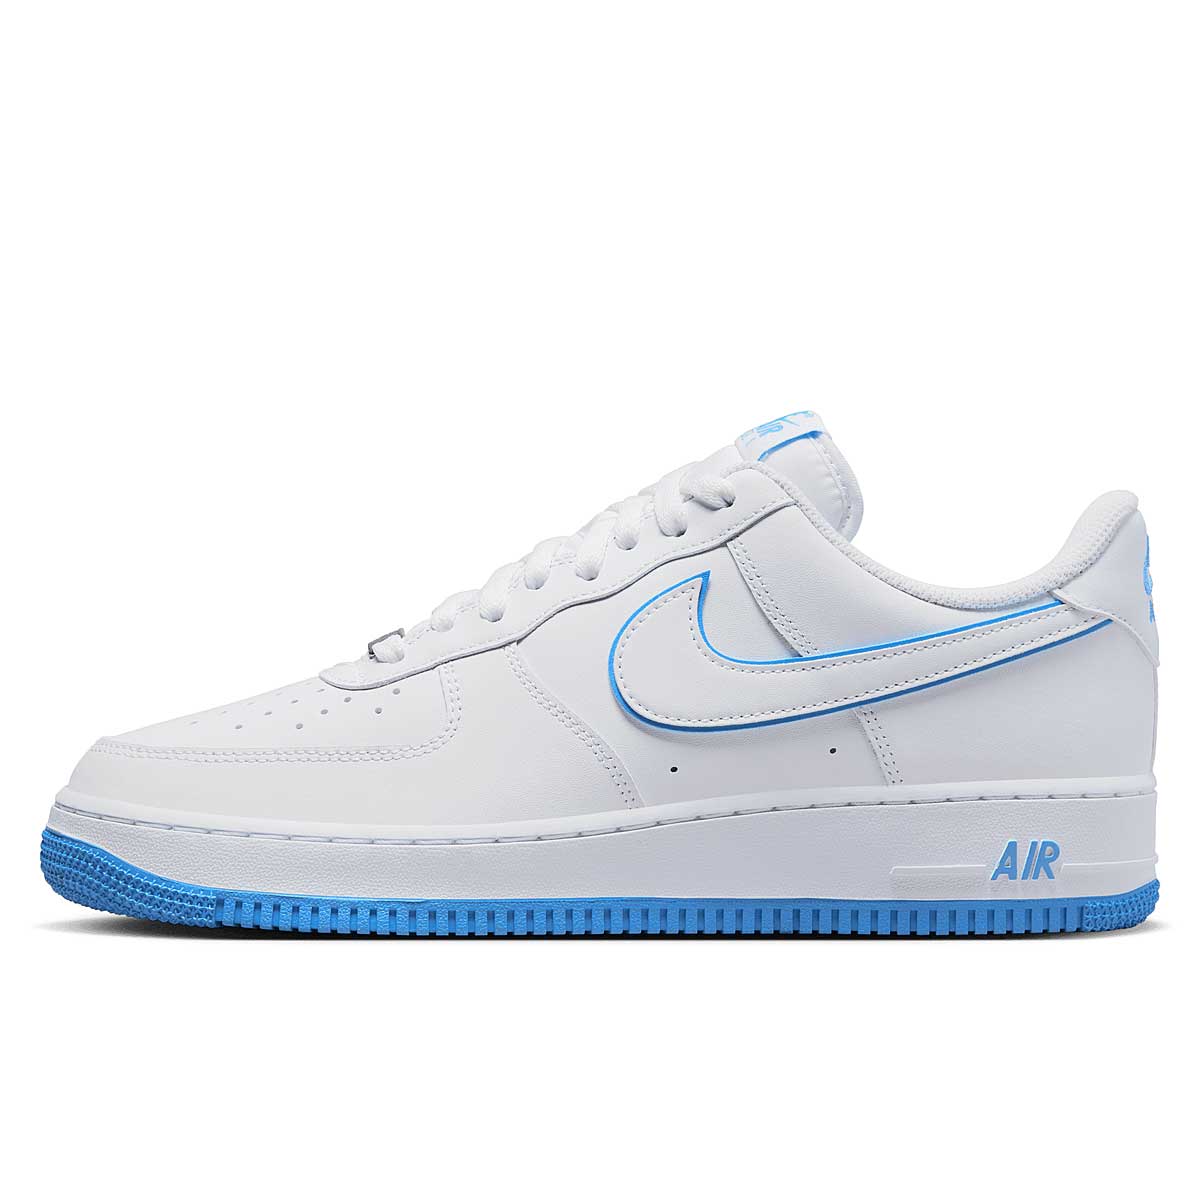 🏀 Get the Nike Air Force 1 07 in white/blue | KICKZ